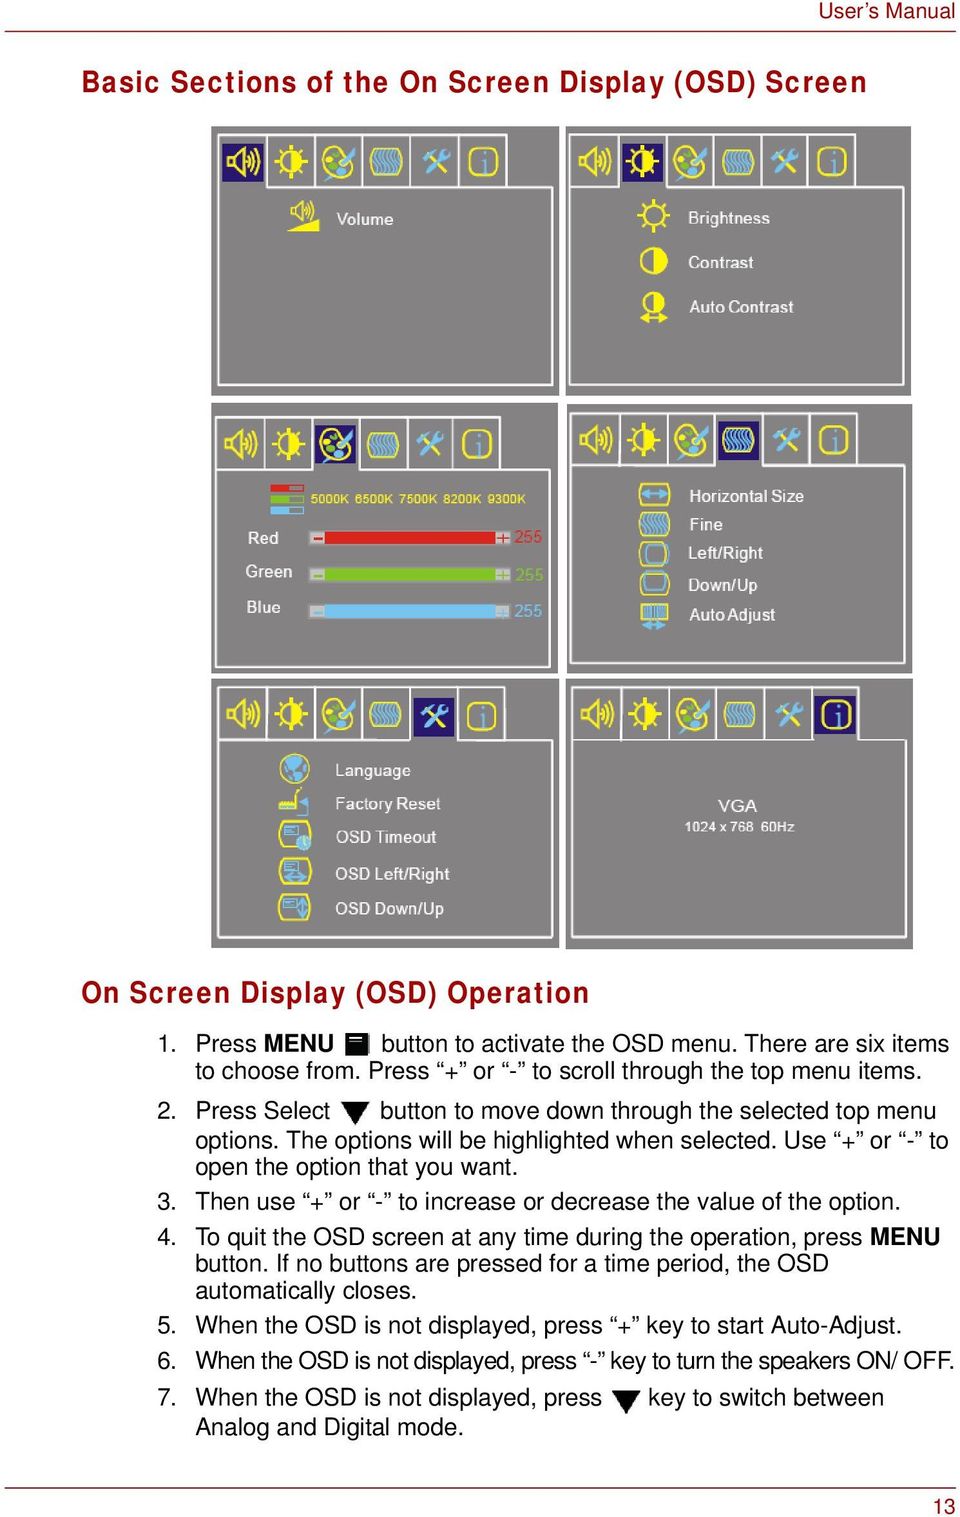 Use + or - to open the option that you want. 3. Then use + or - to increase or decrease the value of the option. 4. To quit the OSD screen at any time during the operation, press MENU button.